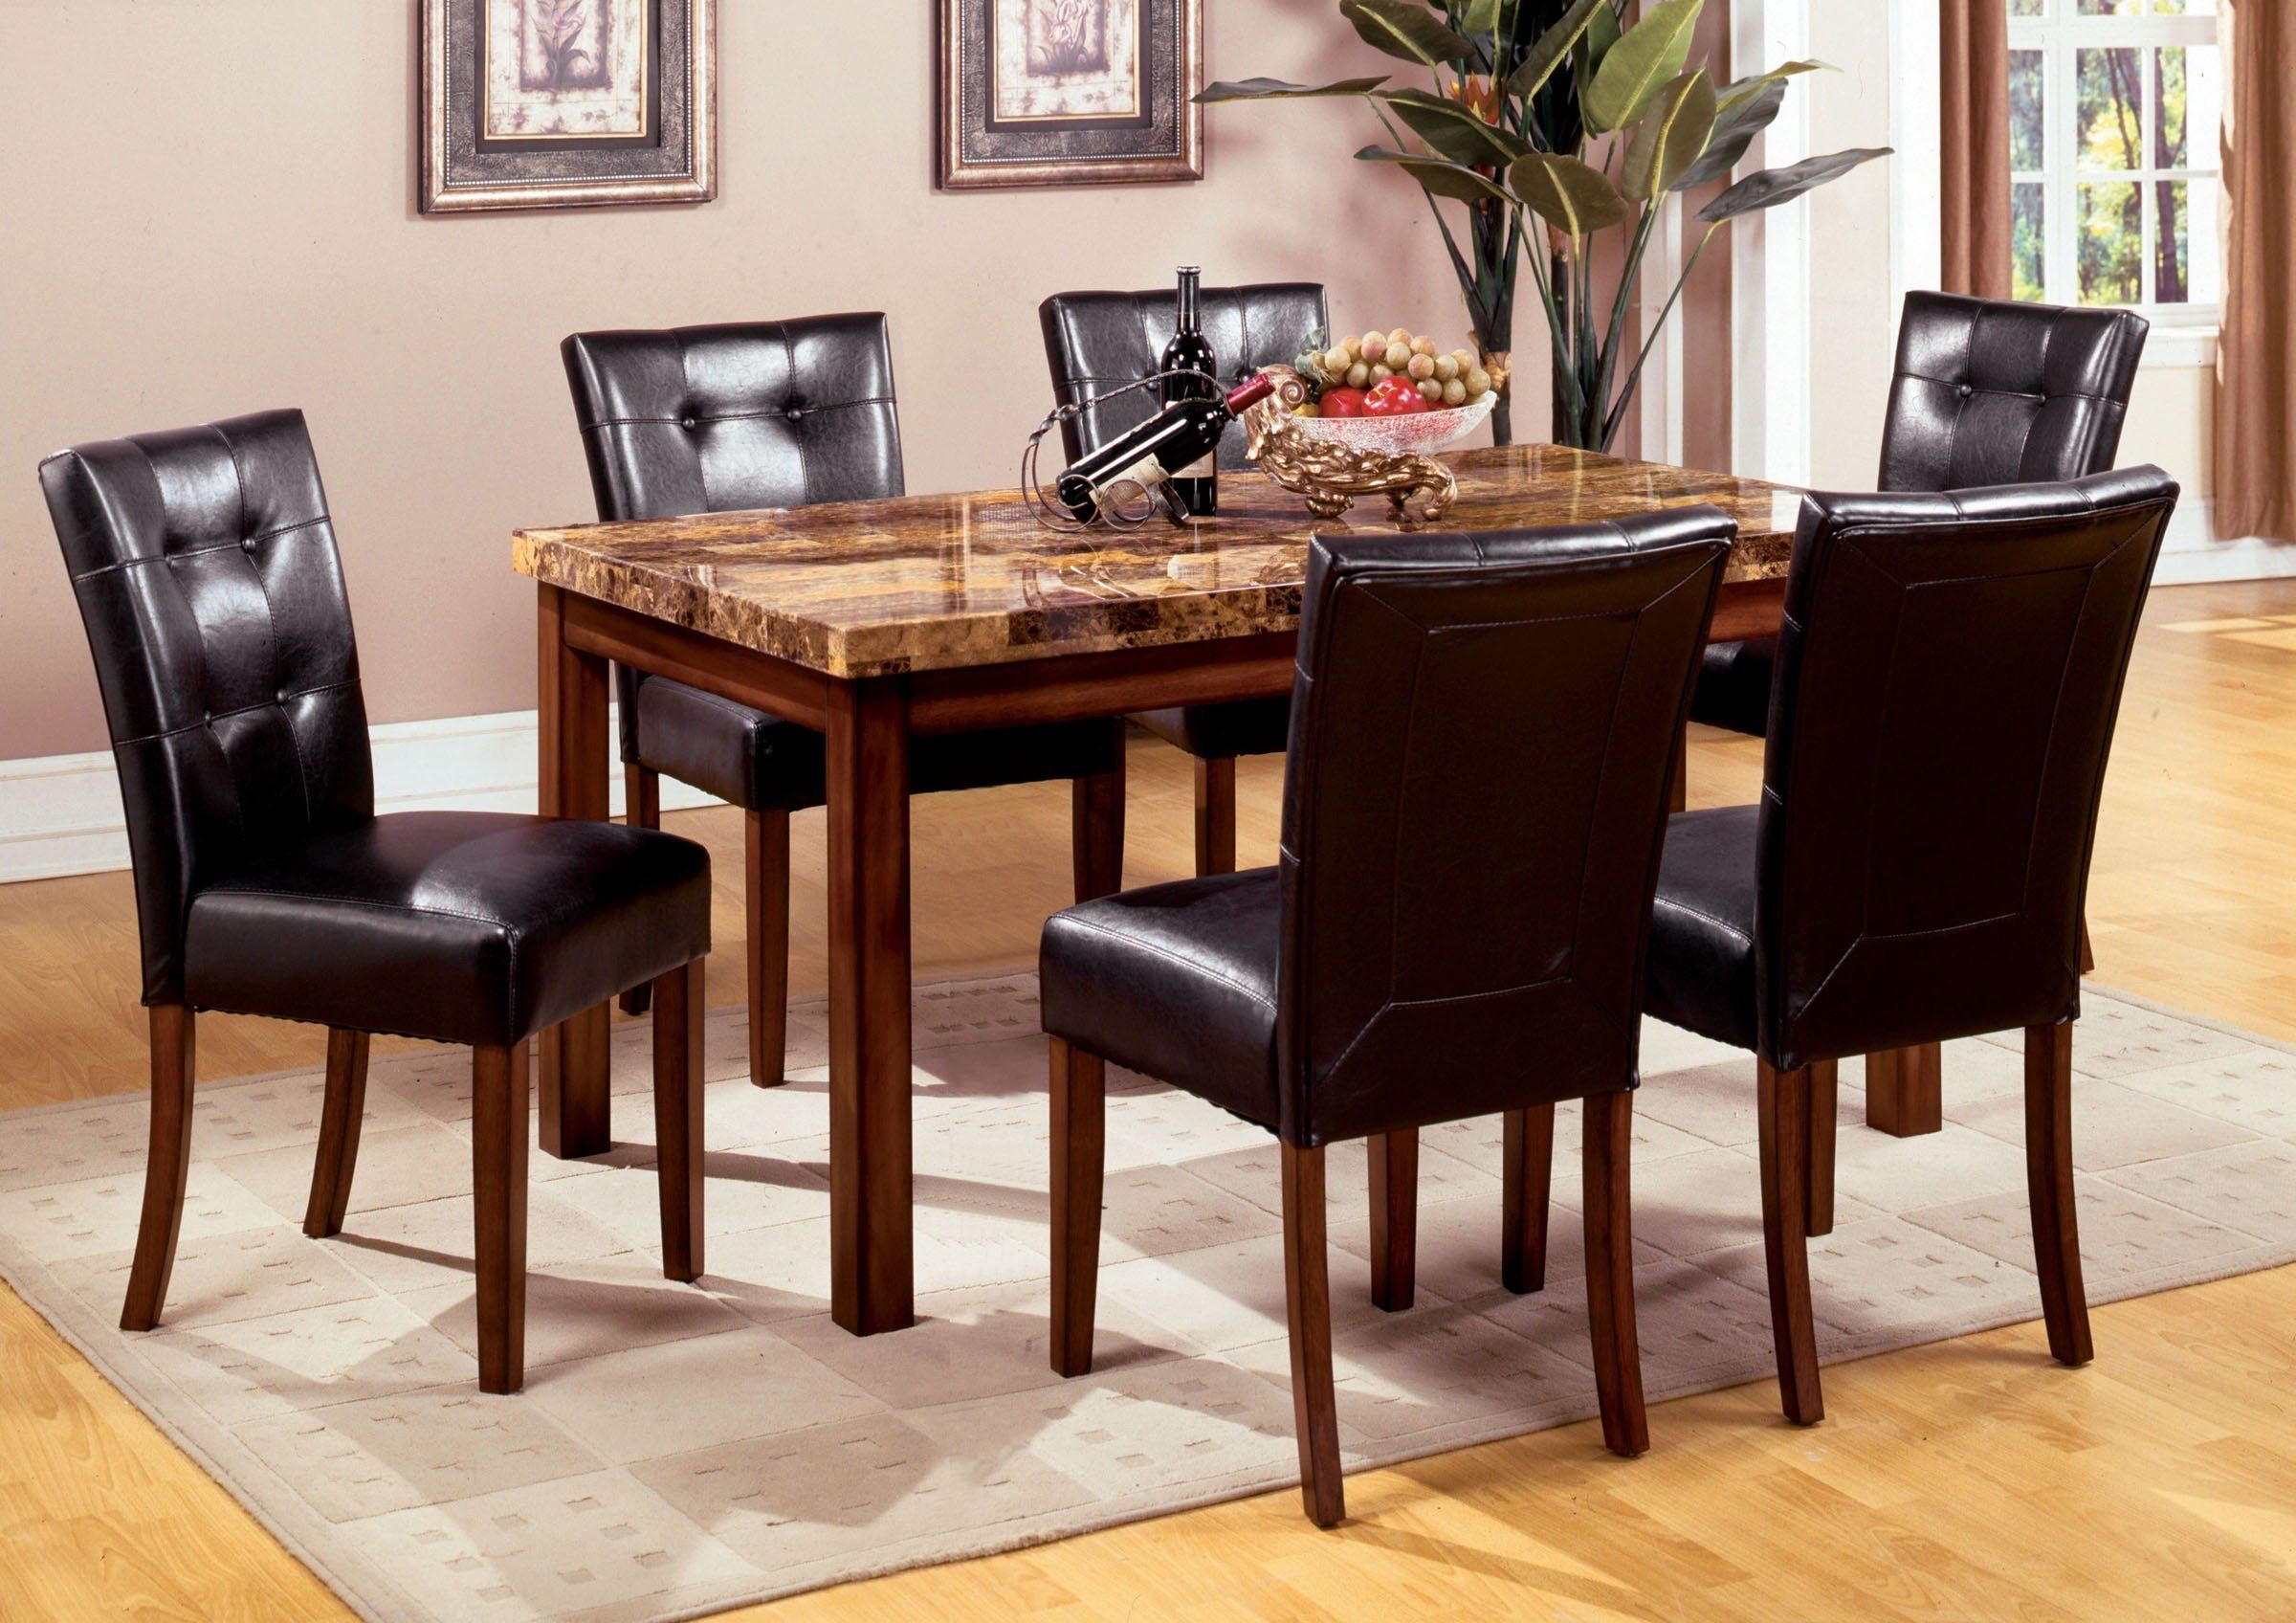 Furniture of America Carignan 7-Piece 60-Inch Dining Table Set with Faux Marble Top, Dark Oak Finish